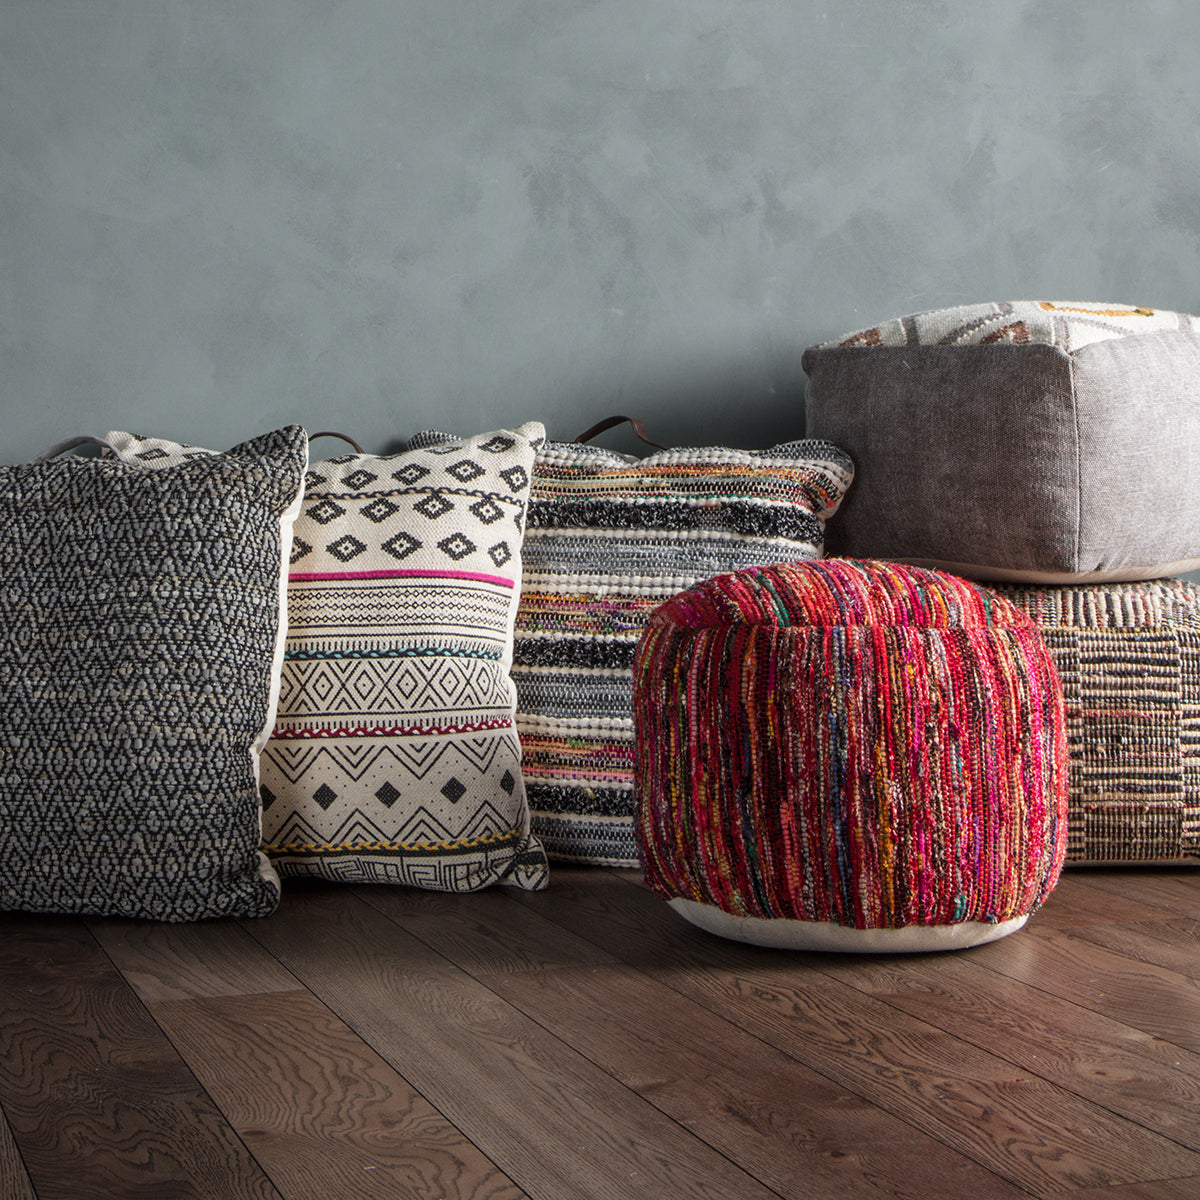 A group of Diaz Pouffe Multi pillows by Kikiathome.co.uk, adding a touch of interior décor to the wooden floor.